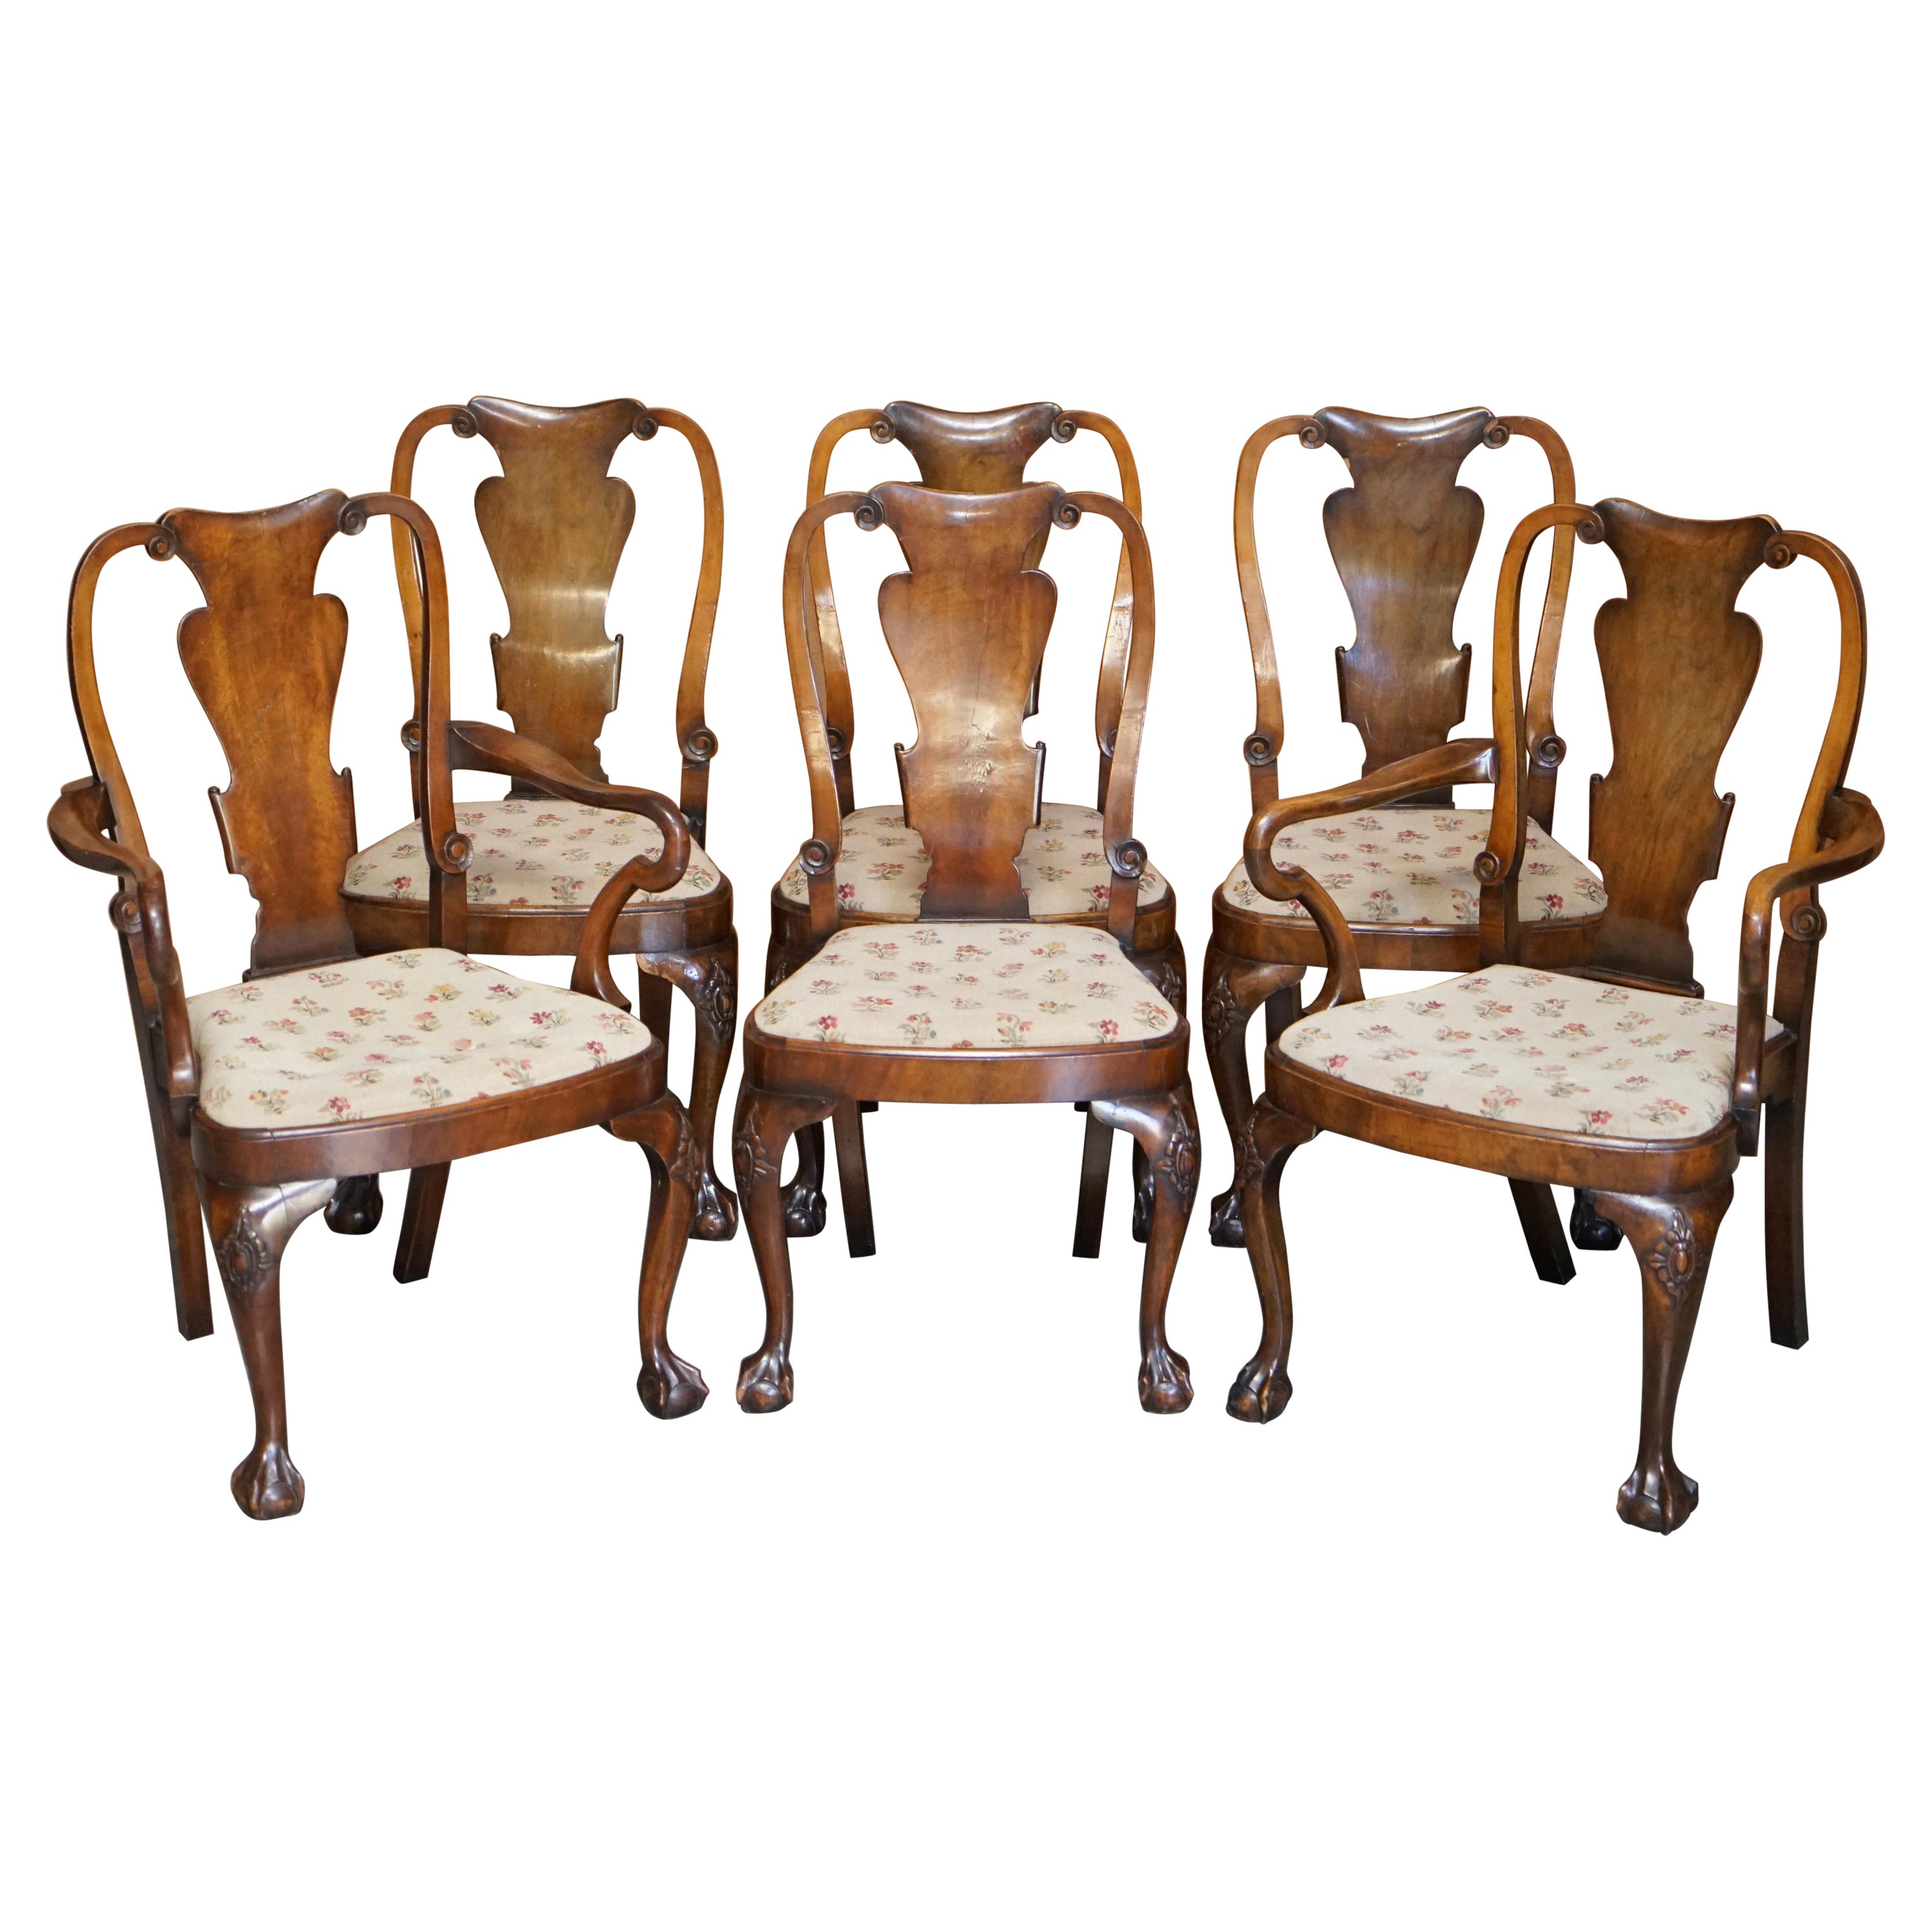 Six Victorian 1880 Walnut Shepherds Crook Dining Chairs with Claw & Ball Feet For Sale